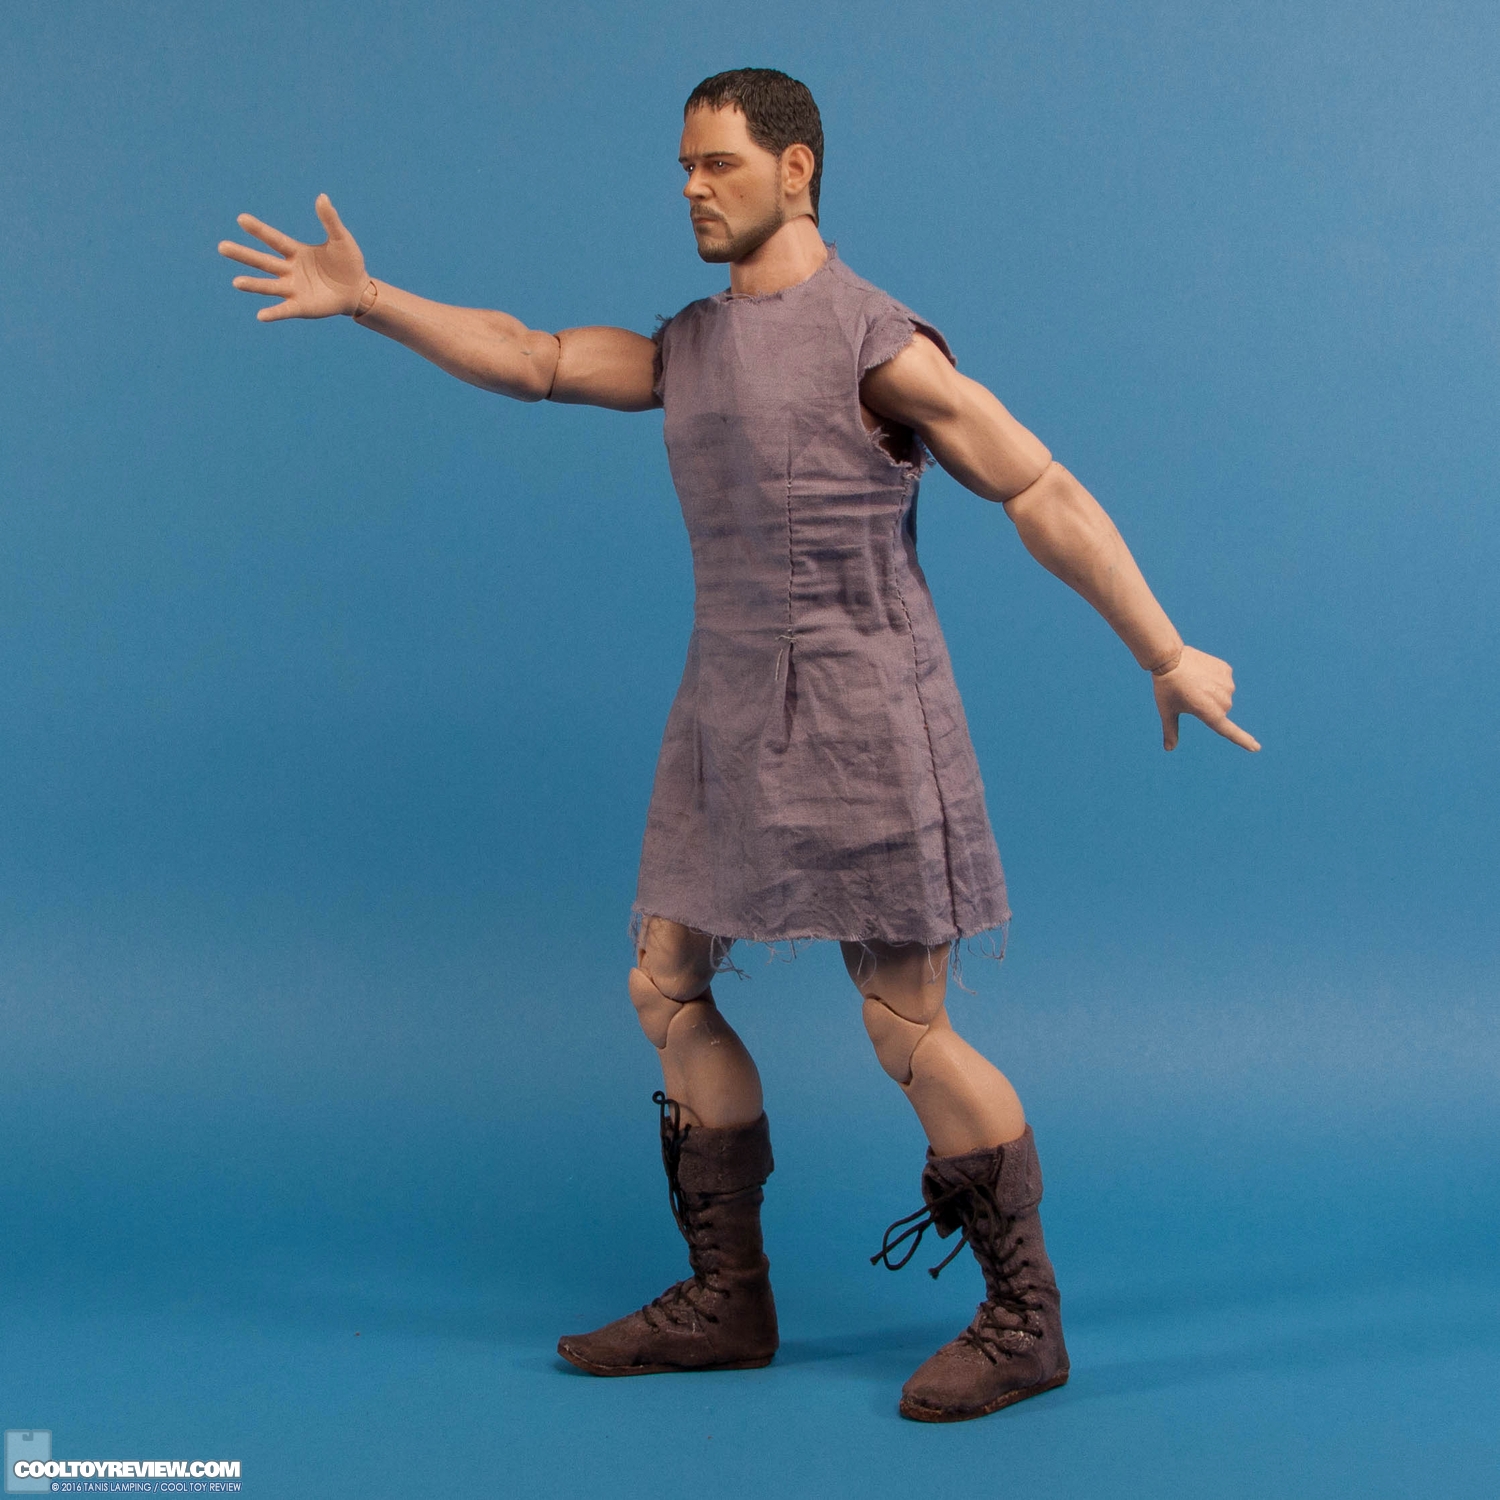 pangaea-toy-gladiator-general-sixth-scale-collectible-figure-027.jpg